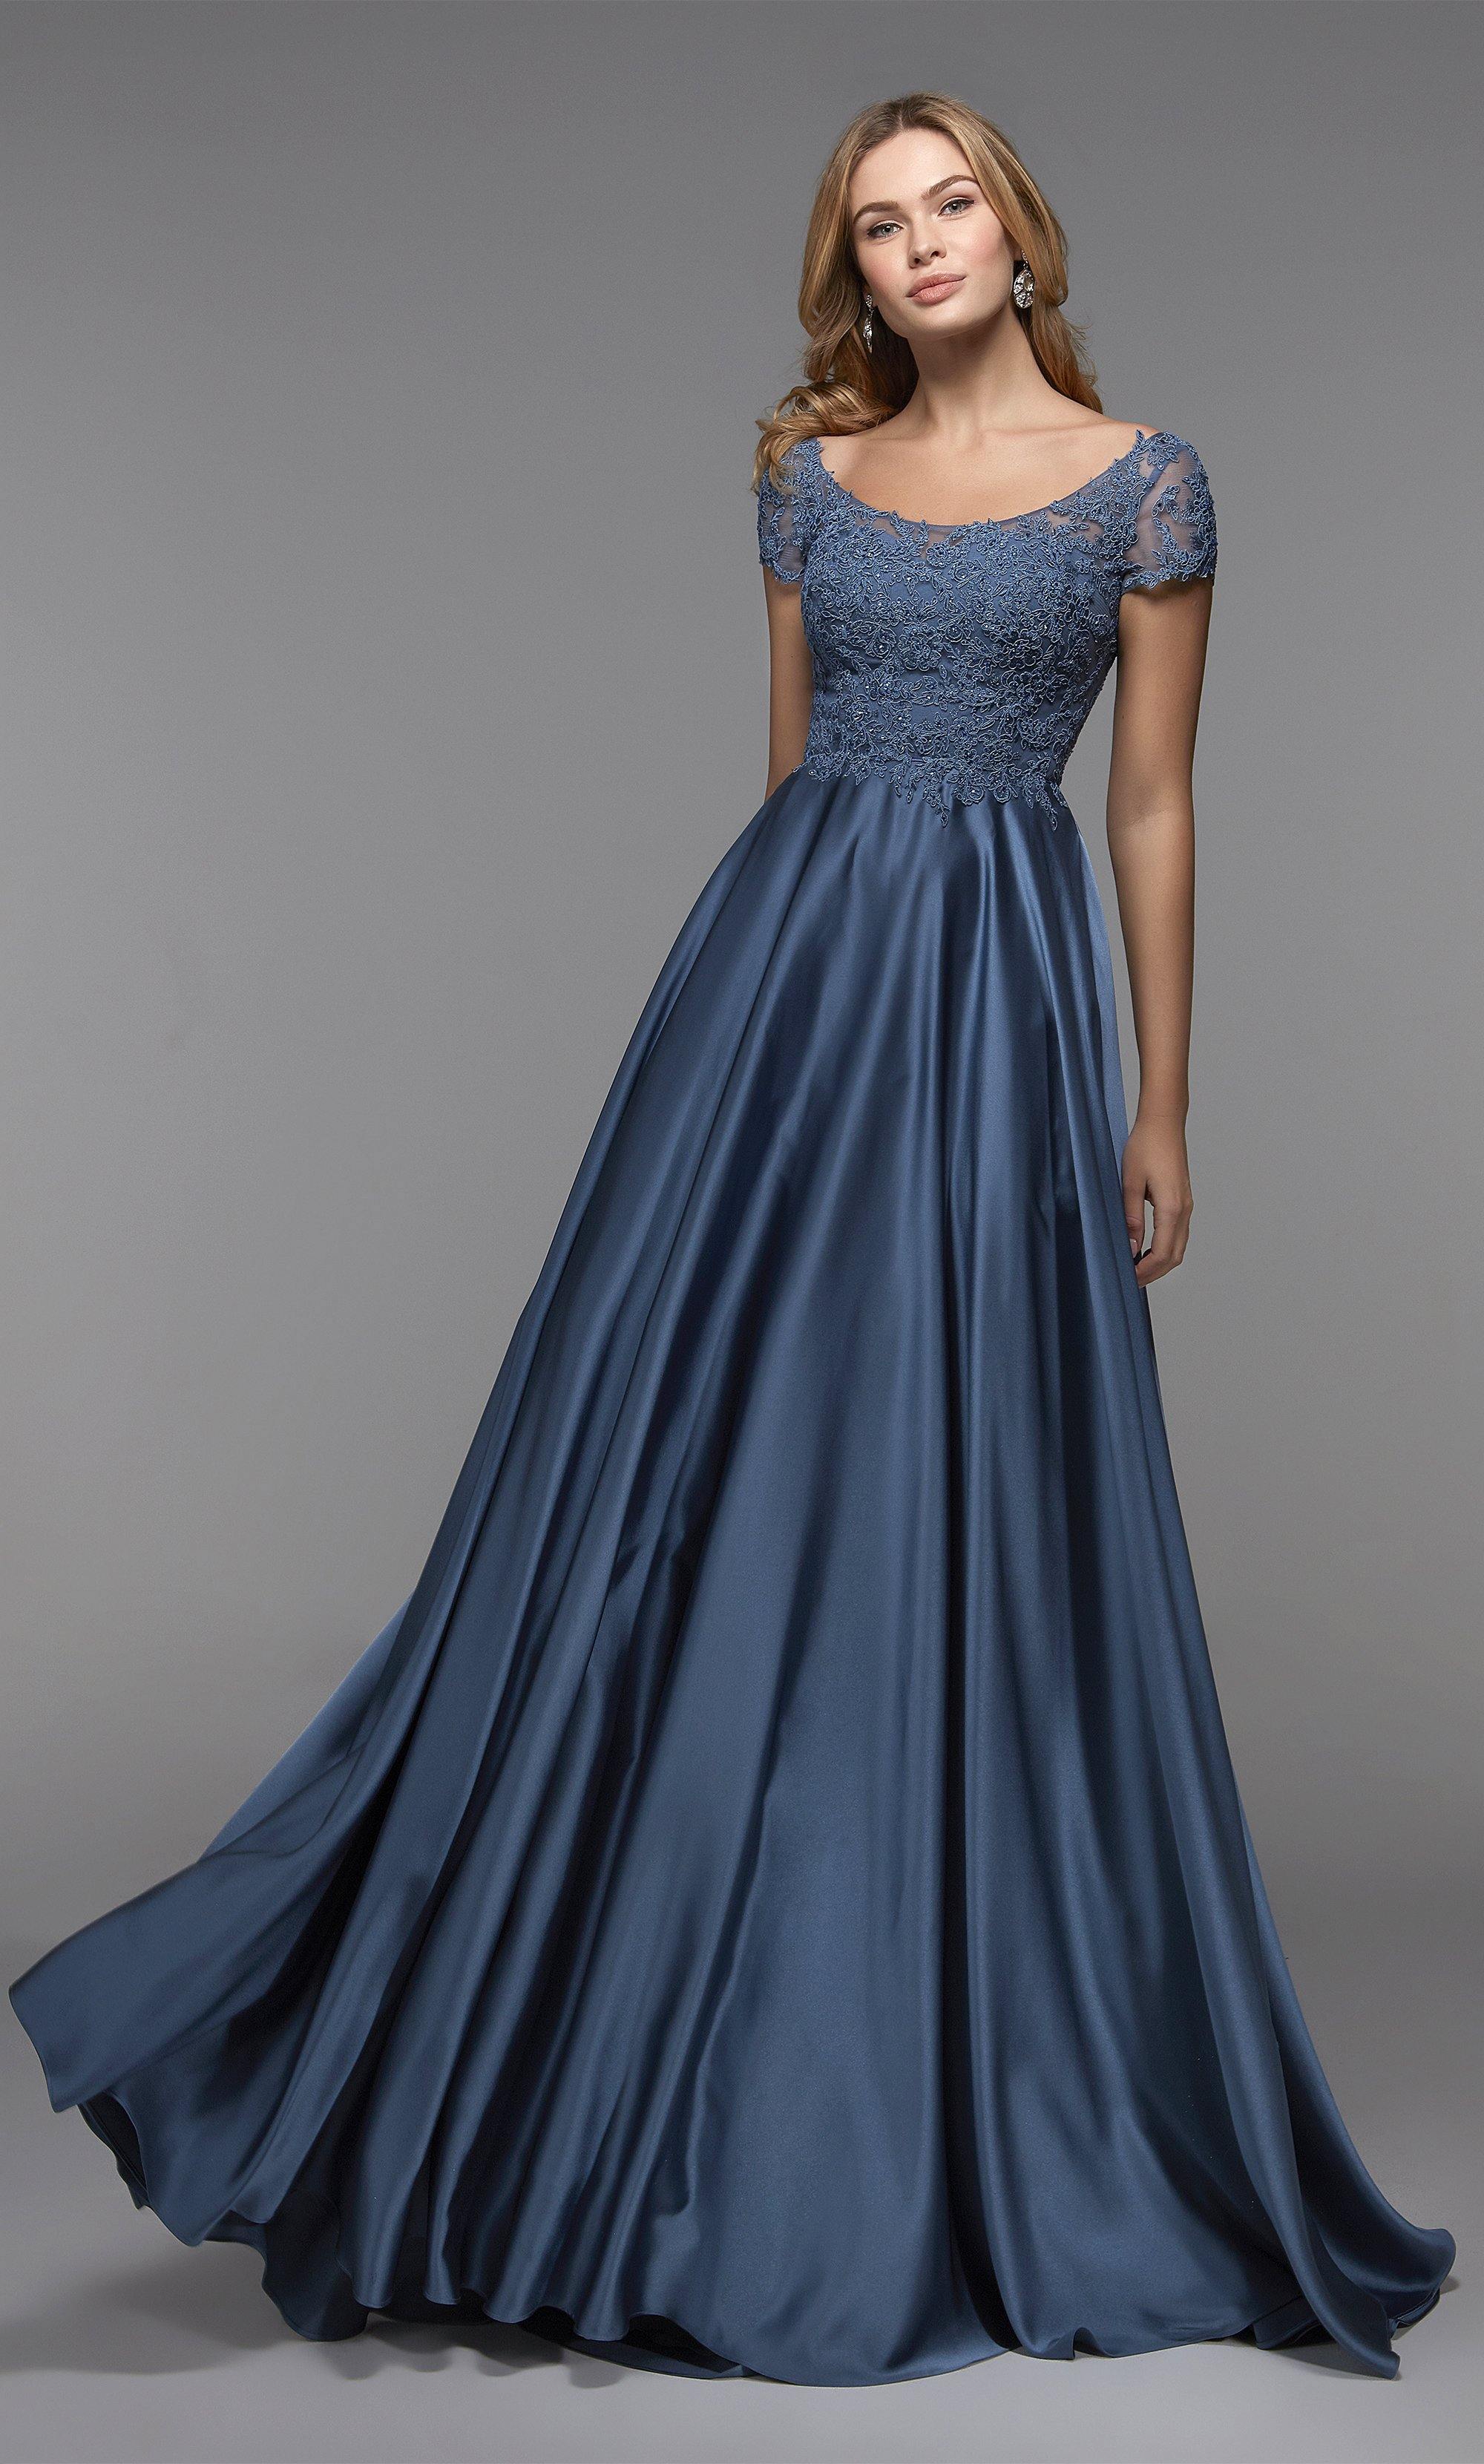 Ellie Wilde | Prom Dresses For Those Who Live Wilde